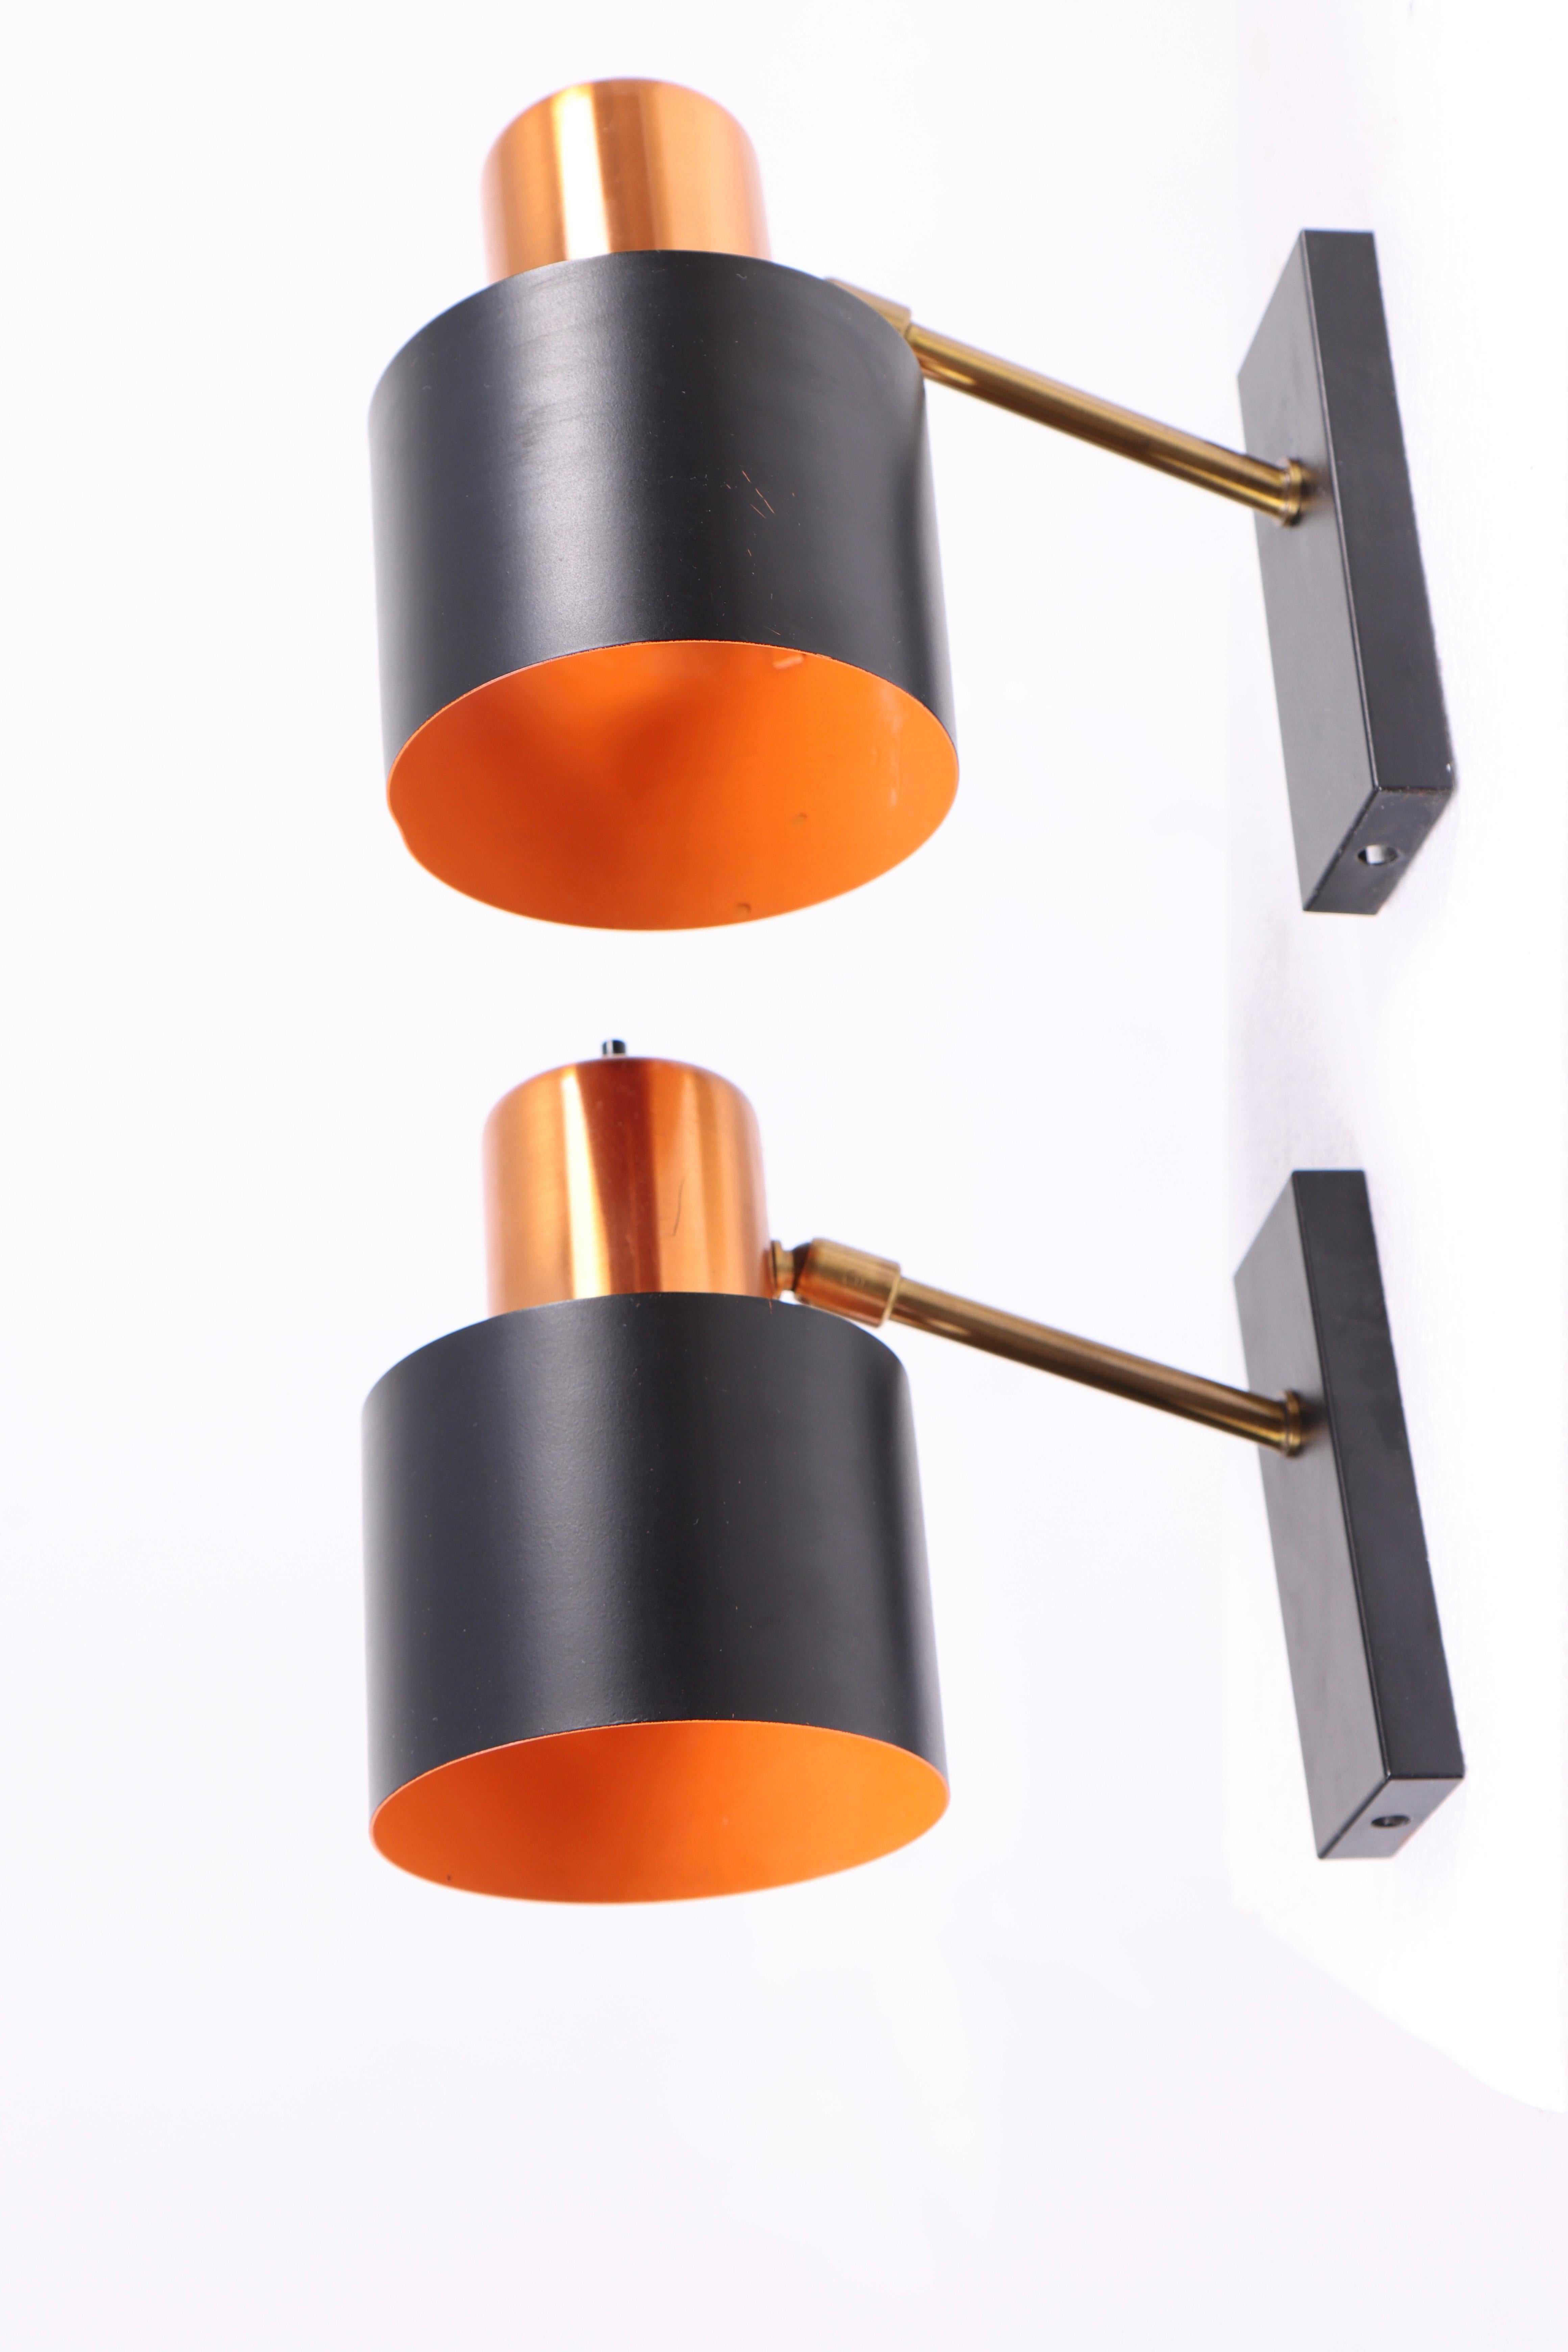 Mid-20th Century Set of Three Midcentury Wall Lights by Jo Hammerborg, Made in Denmark For Sale